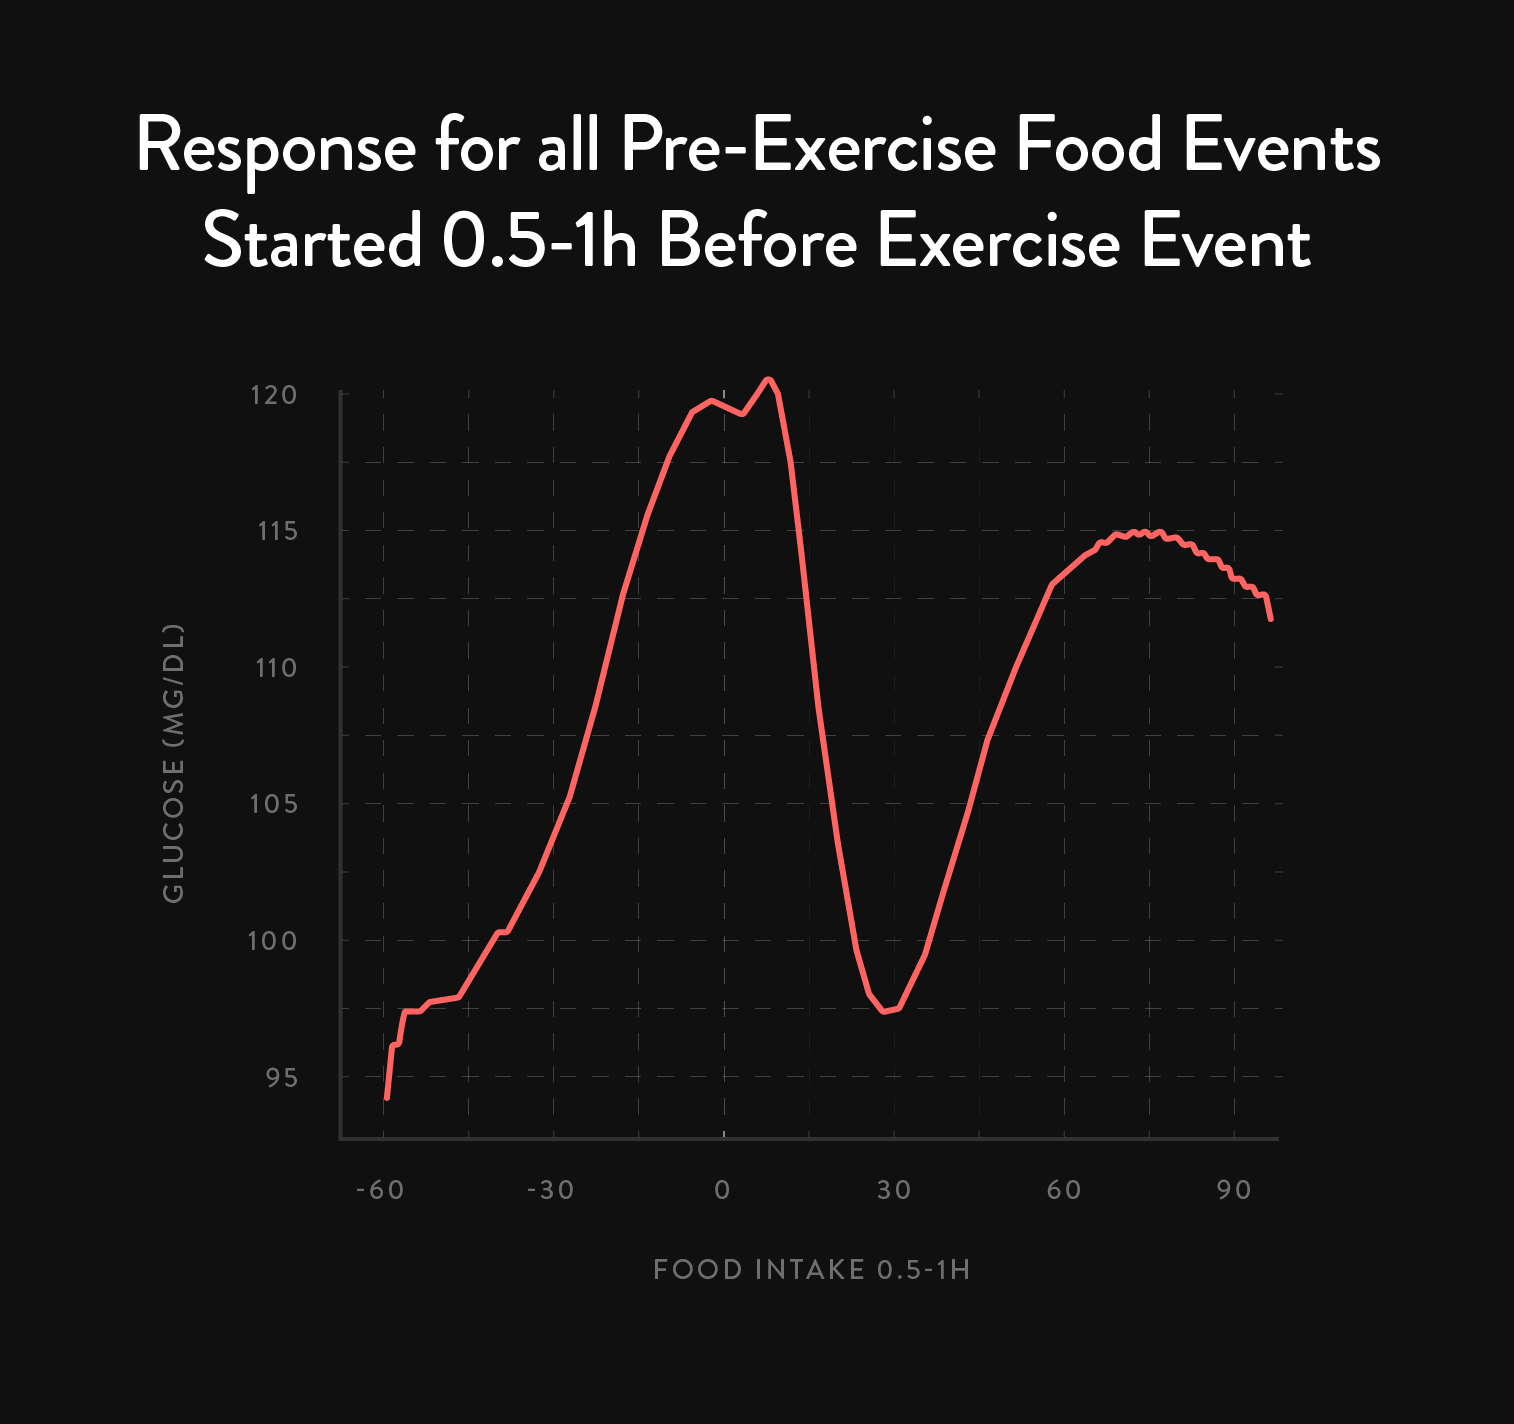 Average glucose response to eating an hour before exercise